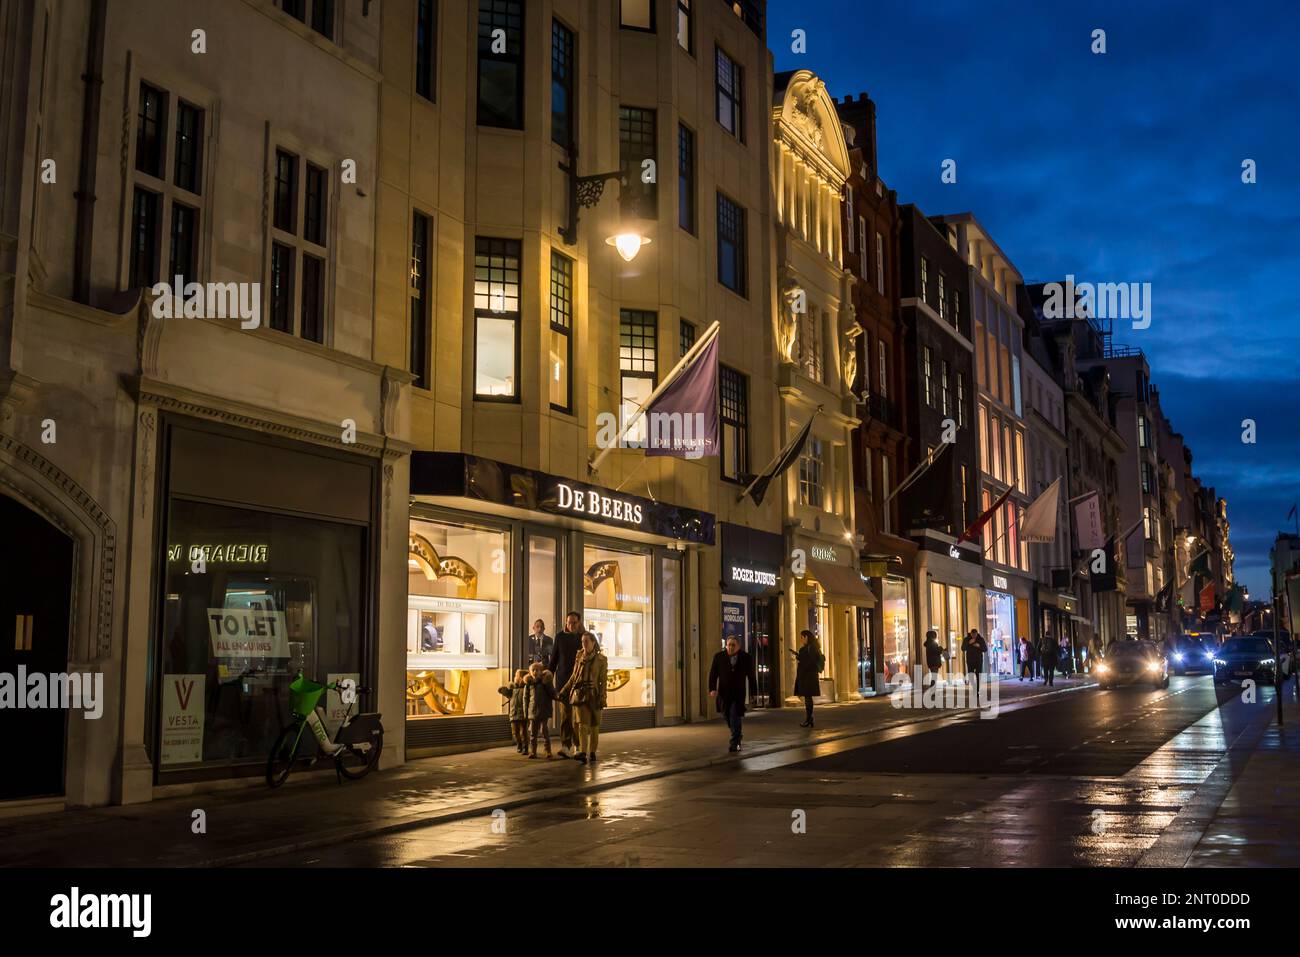 Albemarle Street in Mayfair in central London, off Piccadilly. London, England, UK Stock Photo